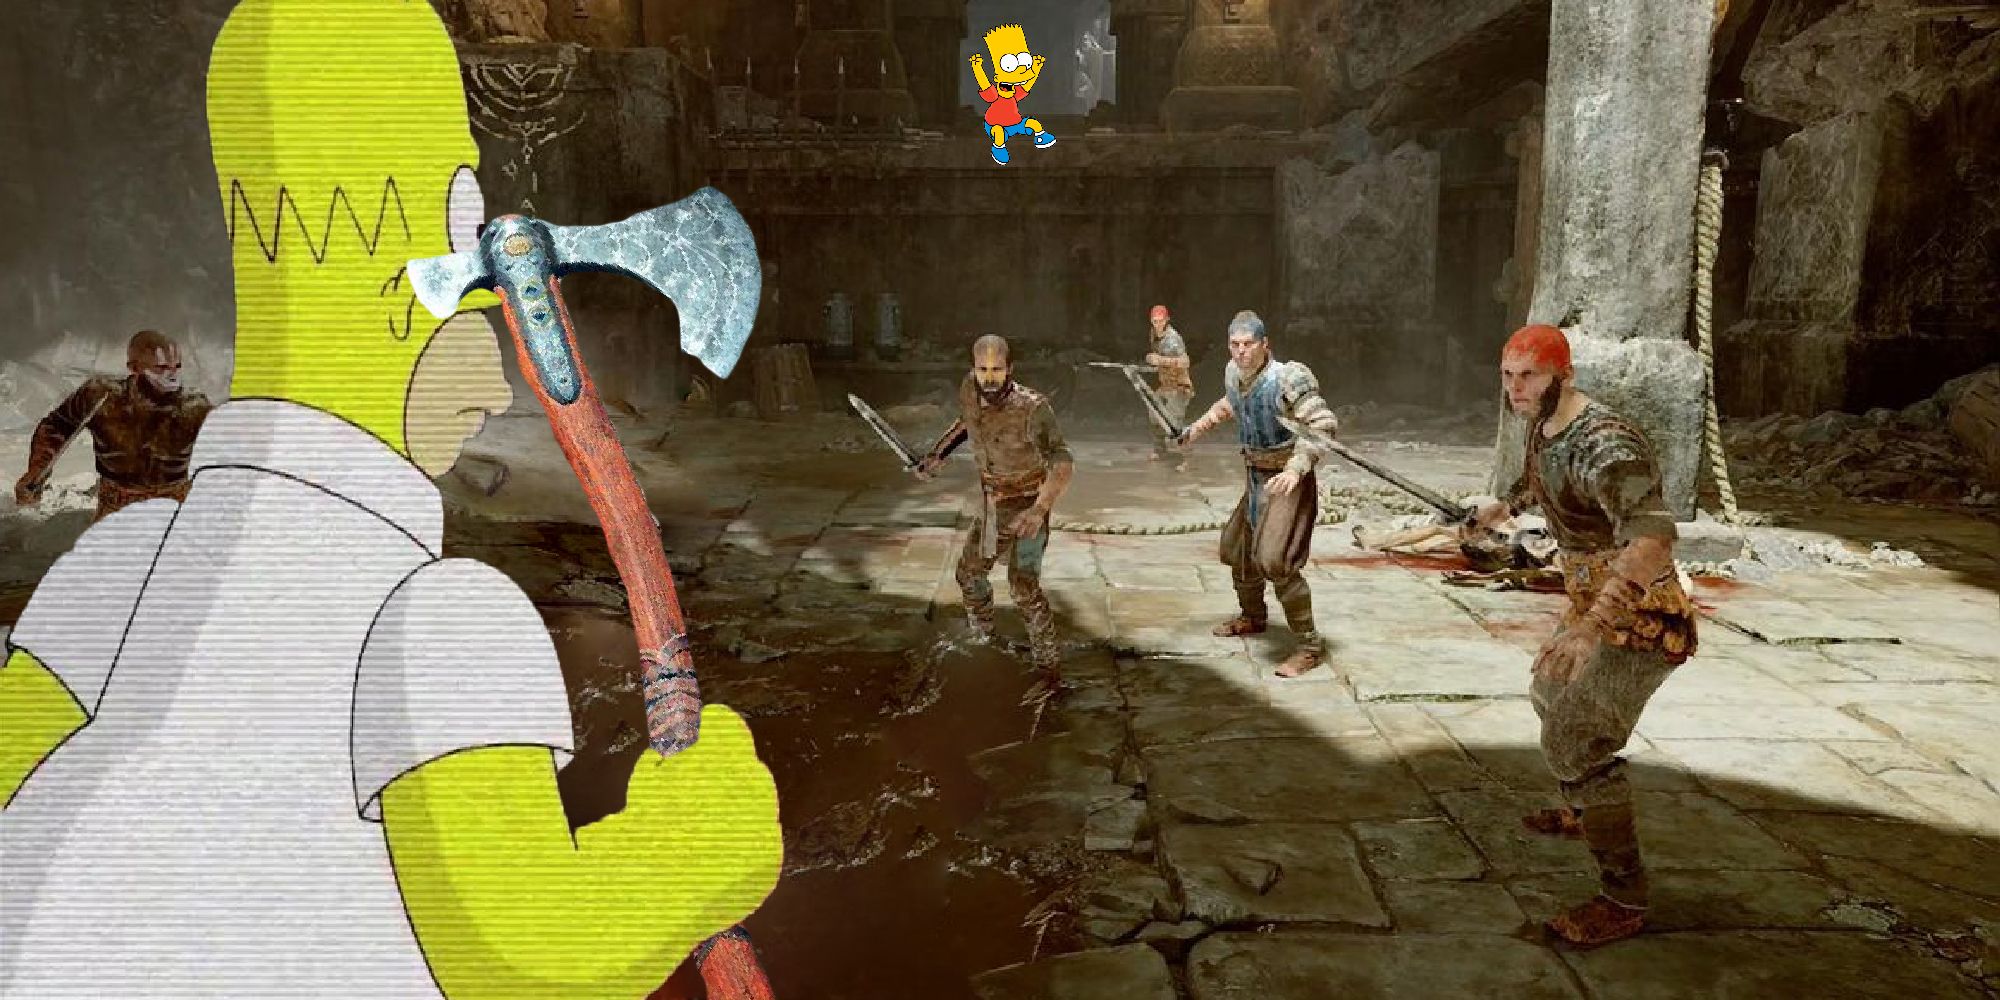 Homer holding the Leviathan Axe in front of Bart and some bandits.